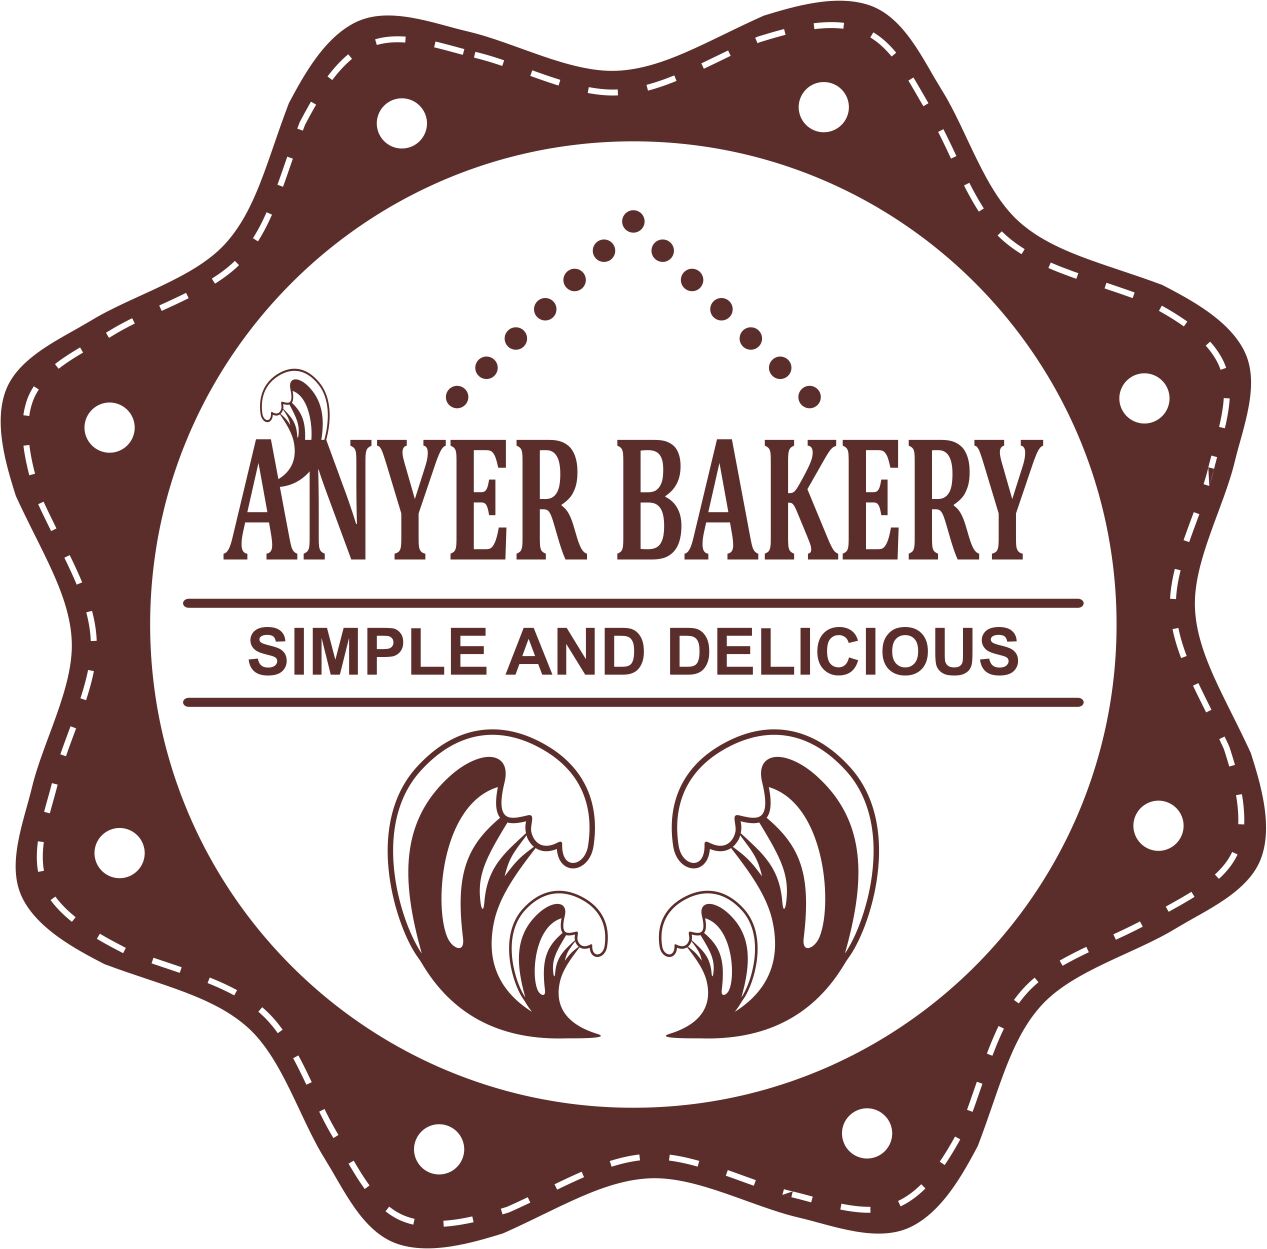 Anyer Bakery